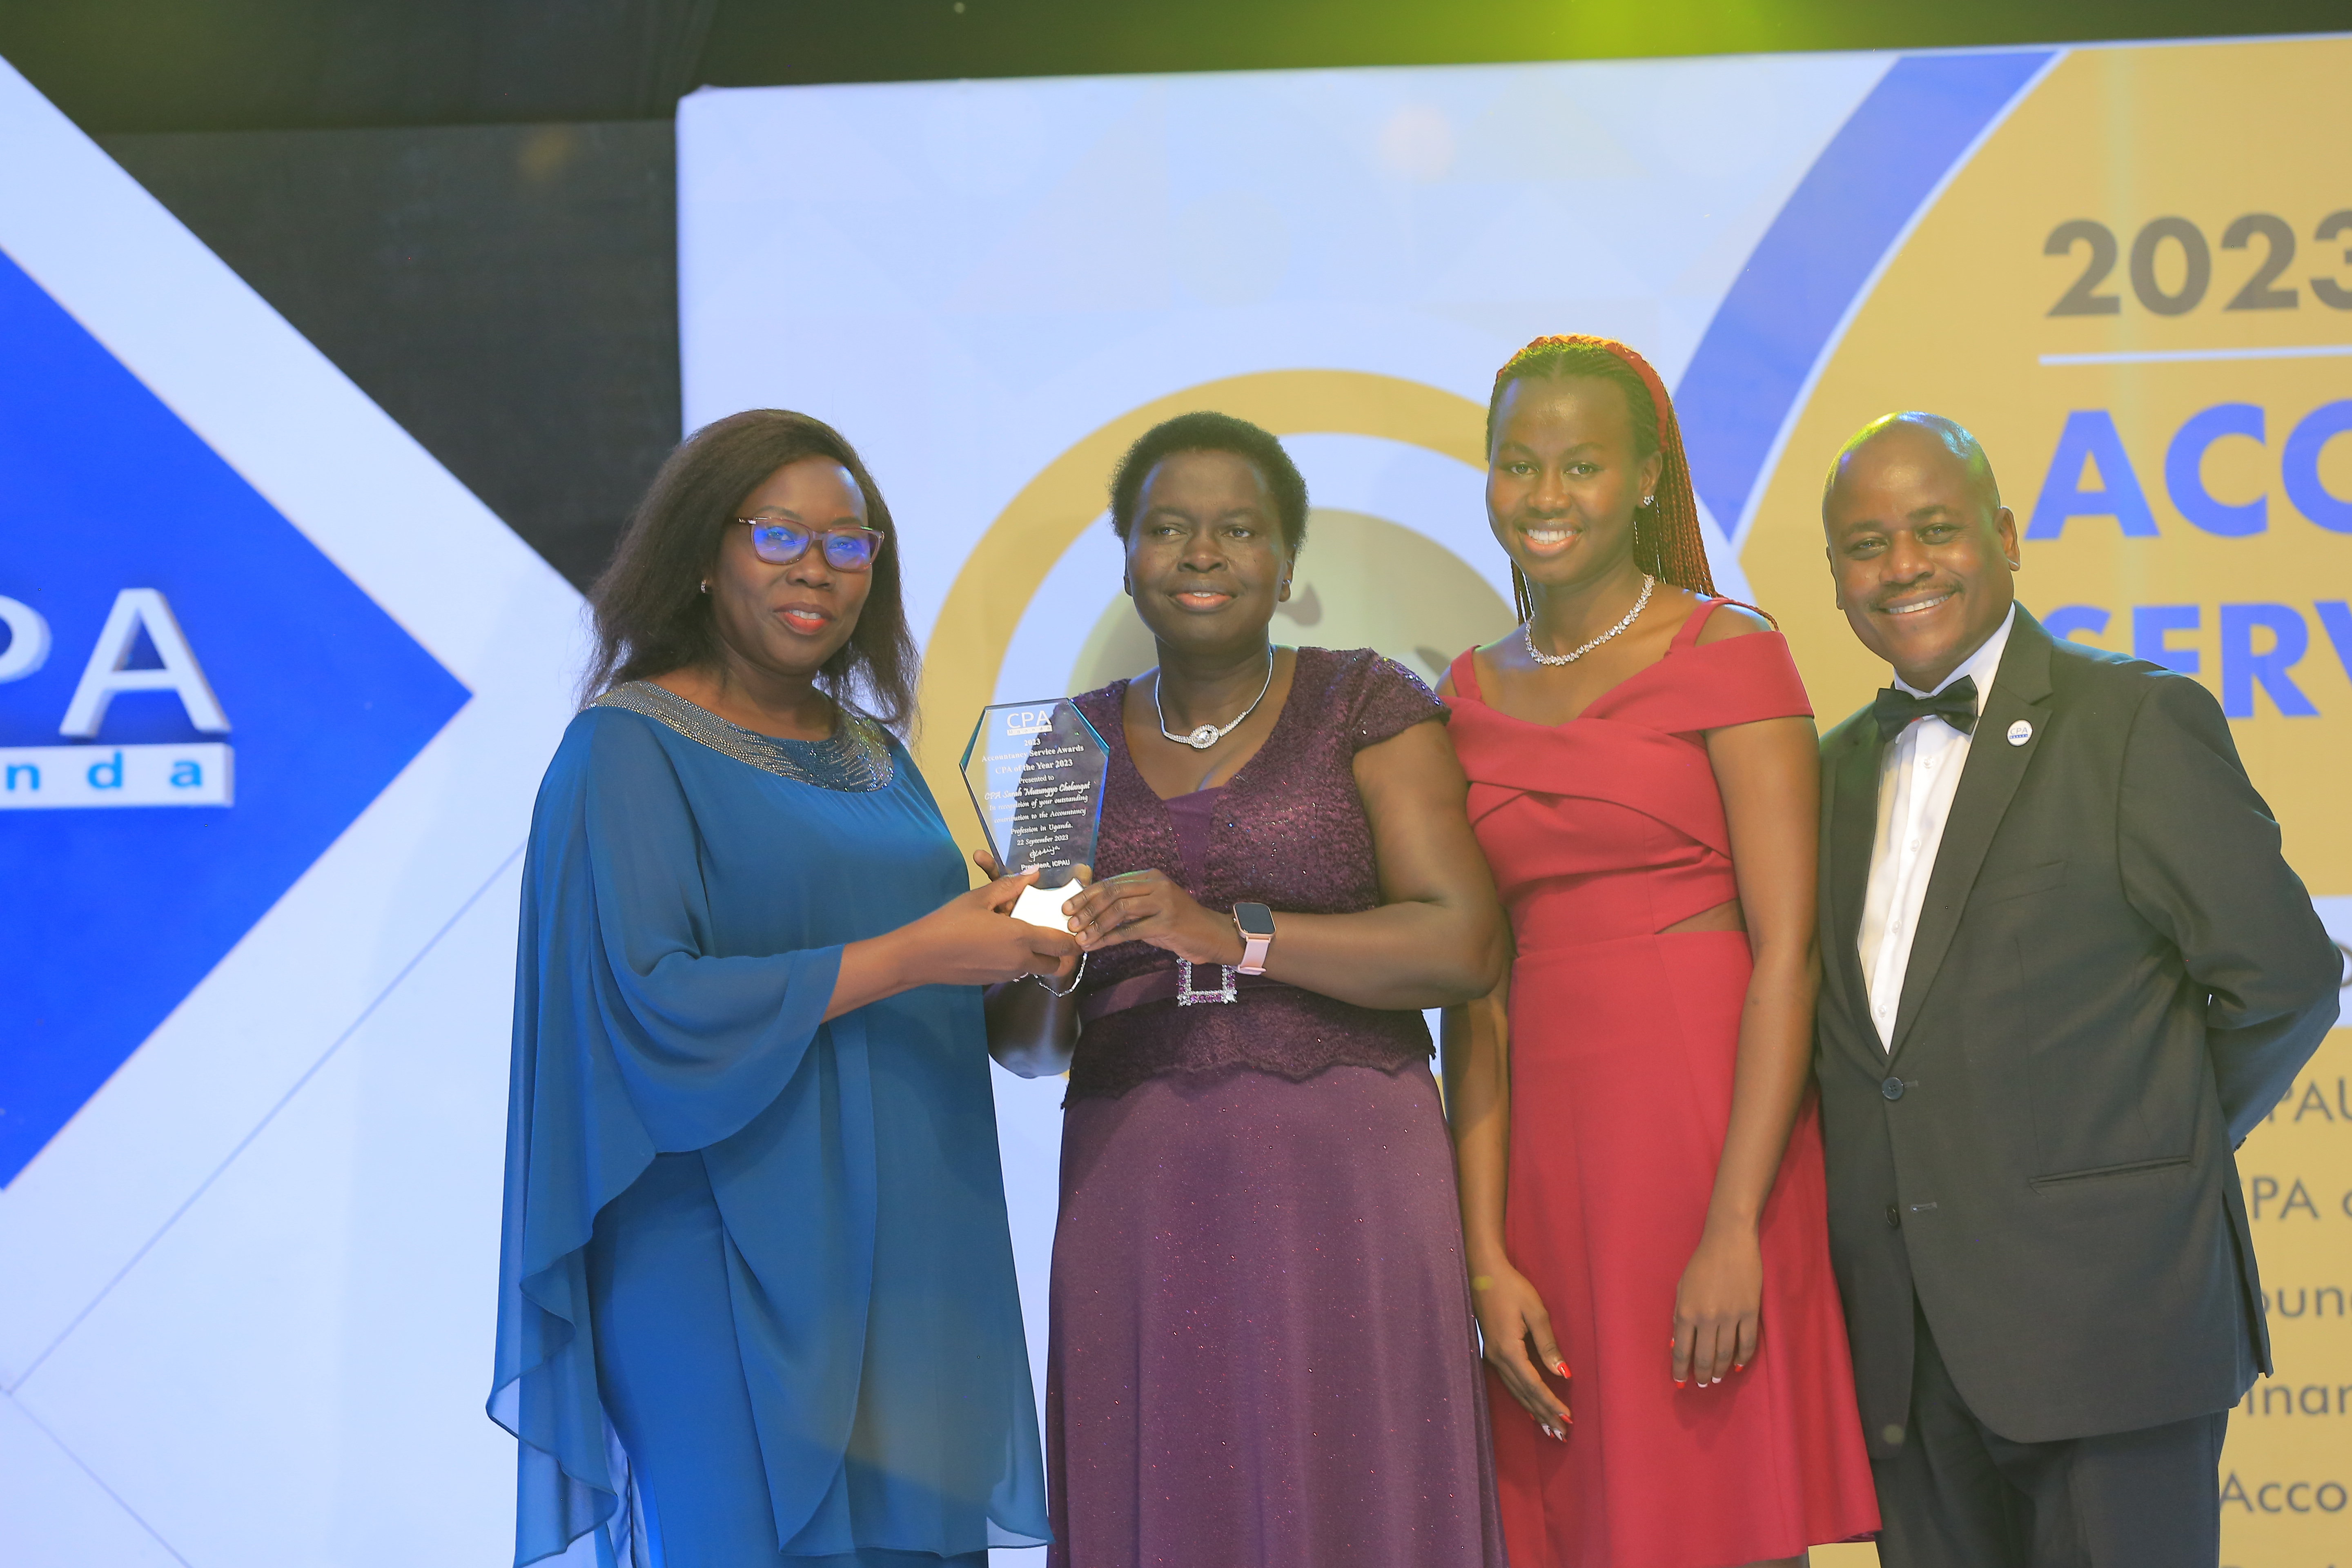 CPA Sarah Chelangat of URA accompanied by her daughter receives an award from CPA Josephine Okui Ossiya, president ICPAU. The extreme right is CPA Ronald Mutumba. (CPA Of the Year Award)